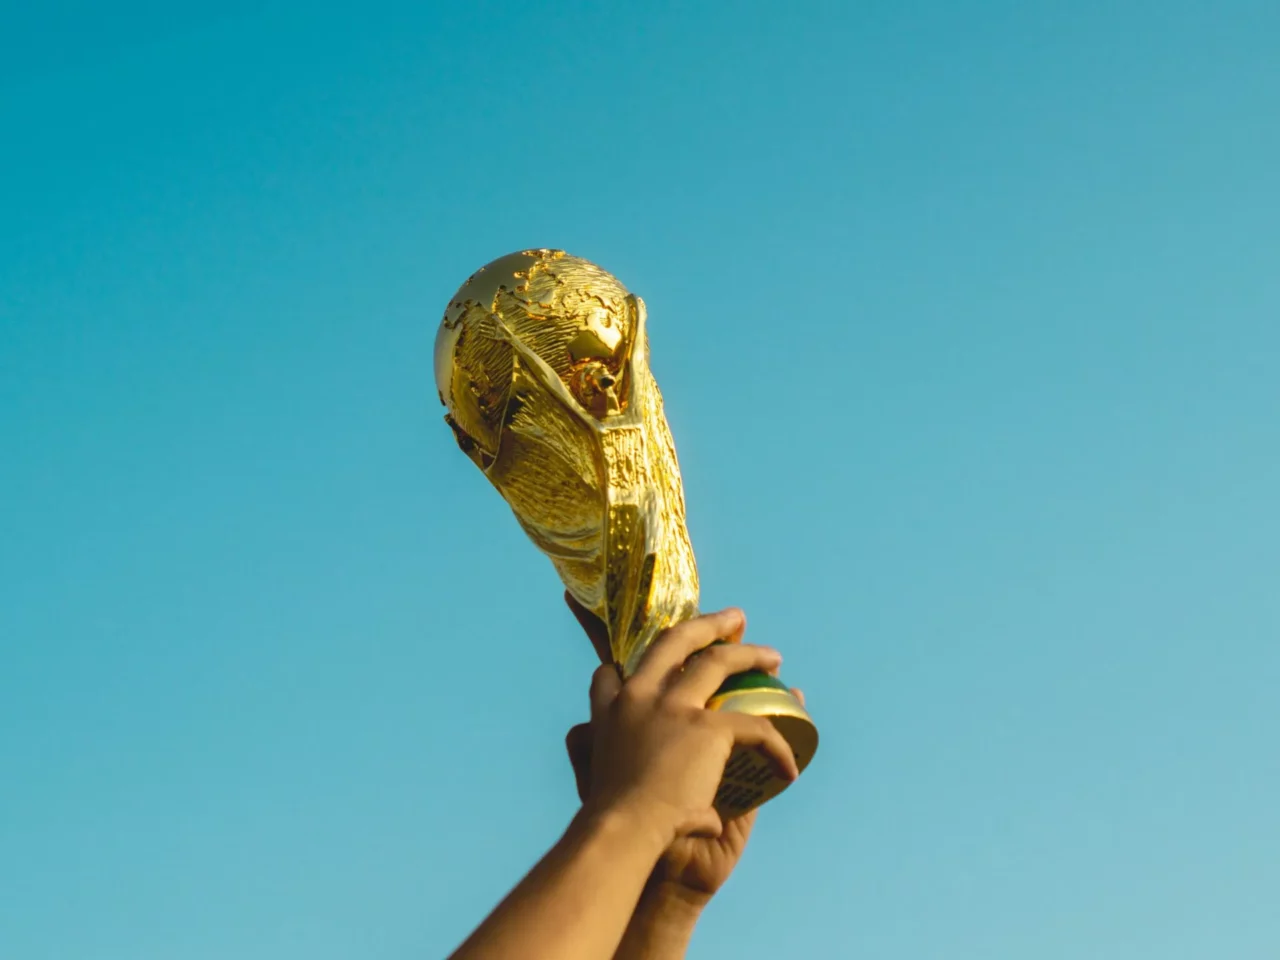 Men’s World Cup in Qatar: Is football inherently political?